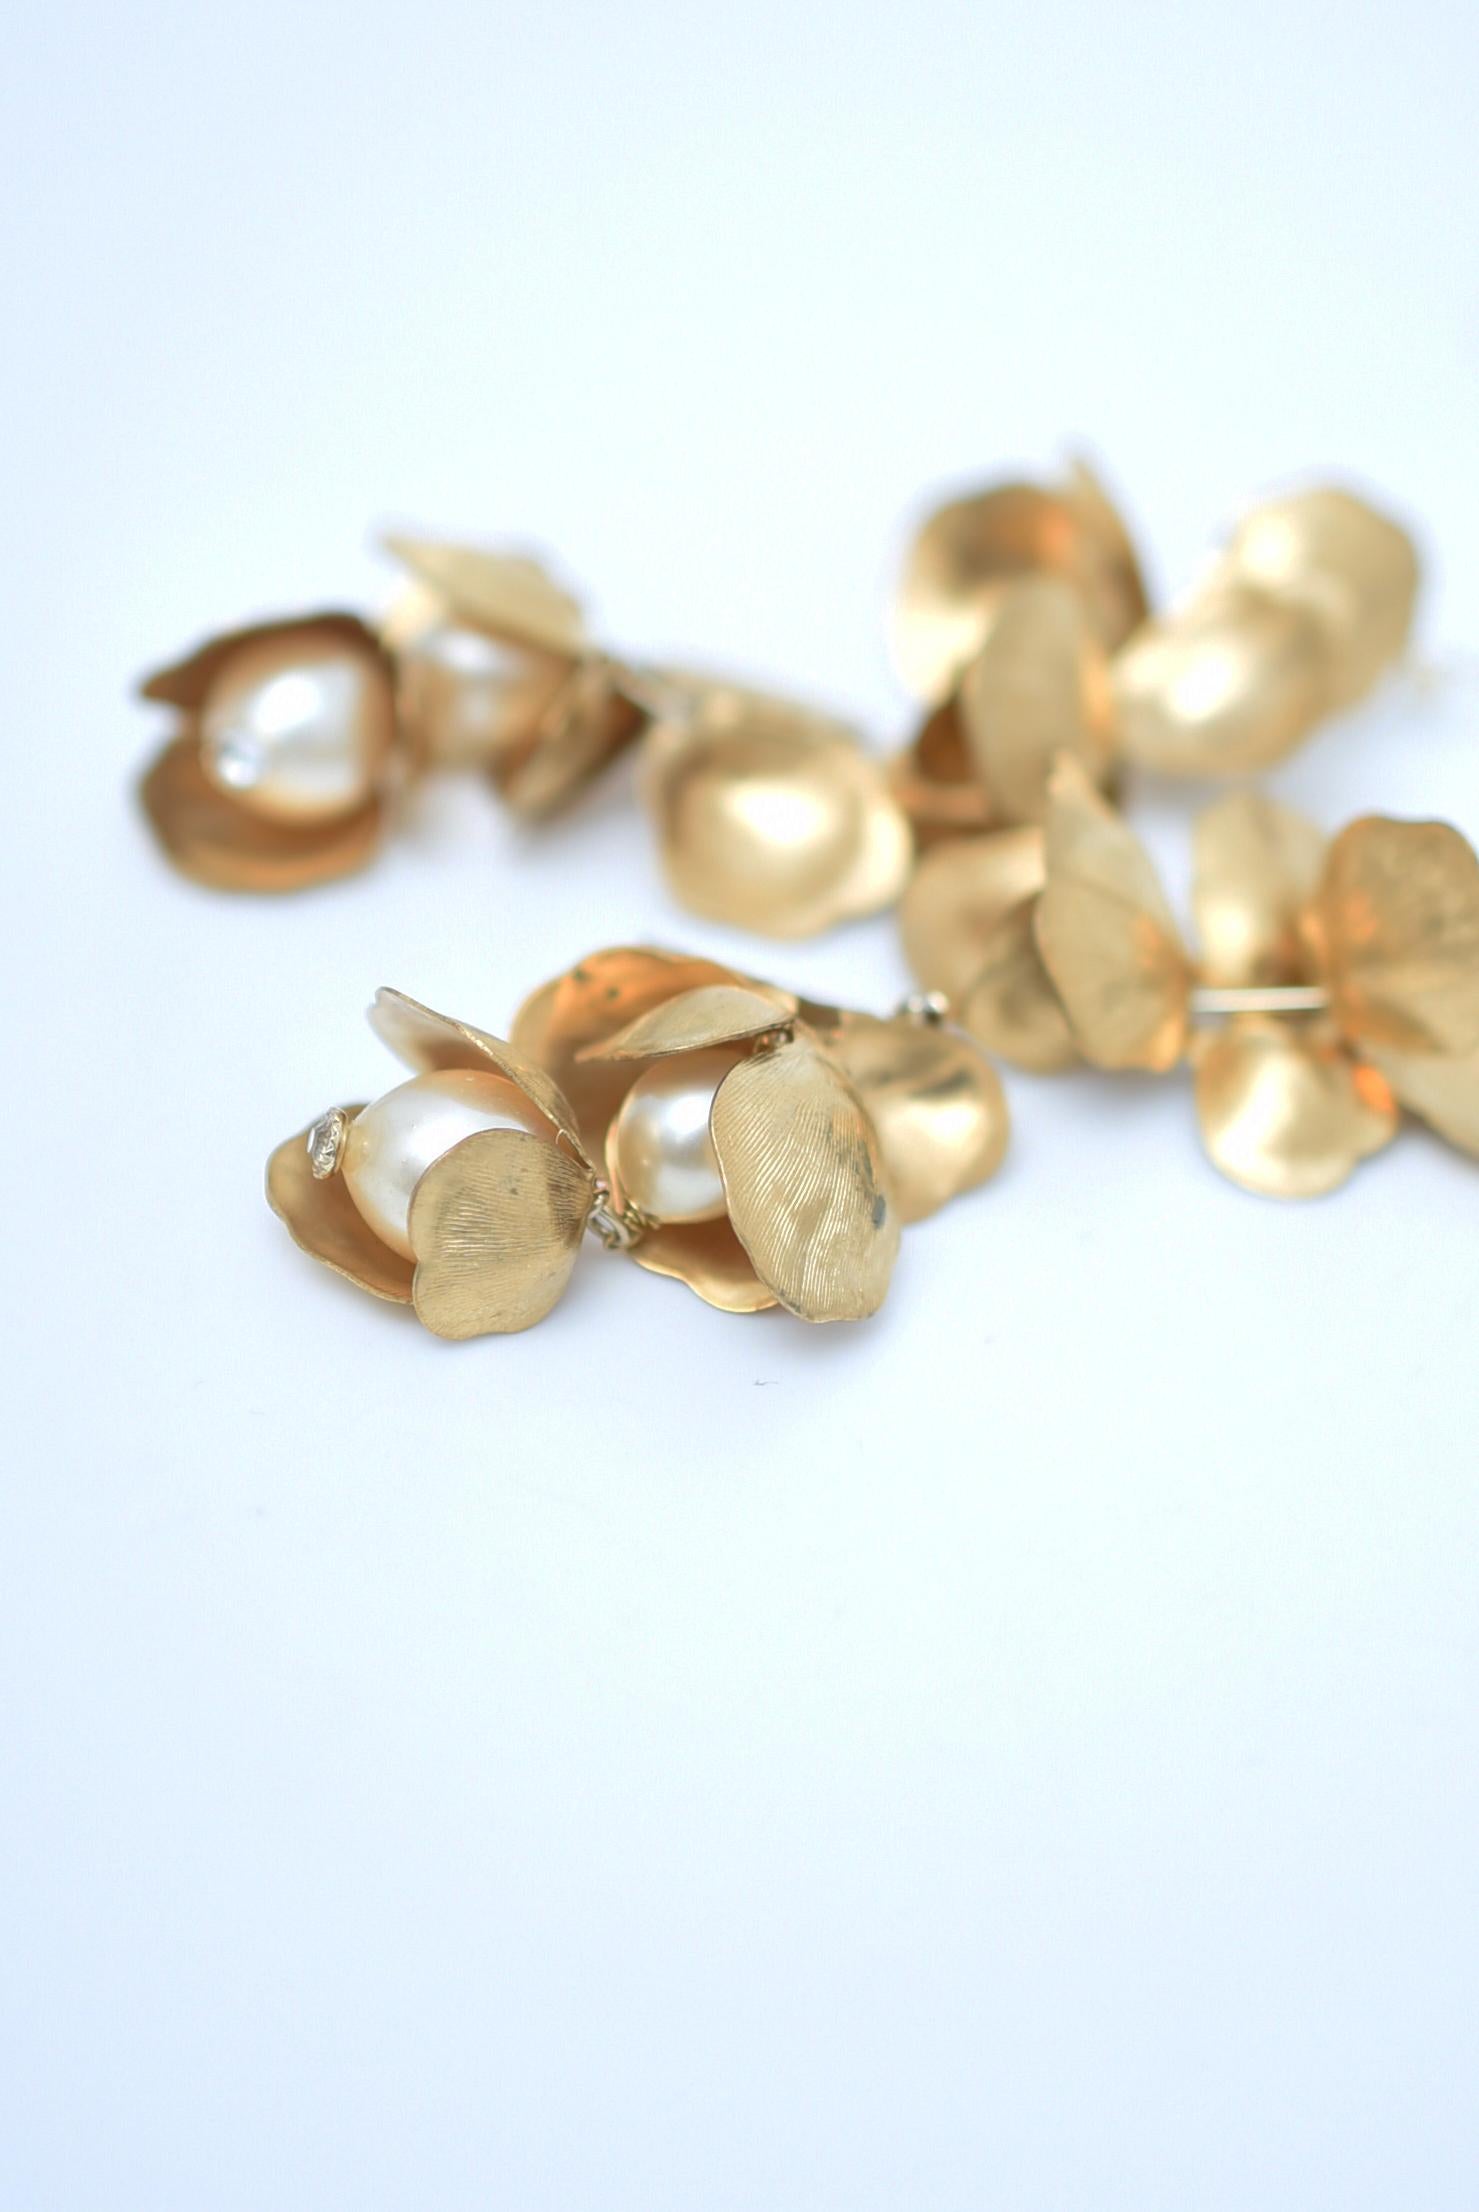 material:Brass, Vintage 1970s Japanese glass pearls,stainless
size:length 6cm


These earrings have a very glamorous look.
The elegant gold and vintage pearls will brighten up your face.
A must-have item for wedding dresses and other glamorous